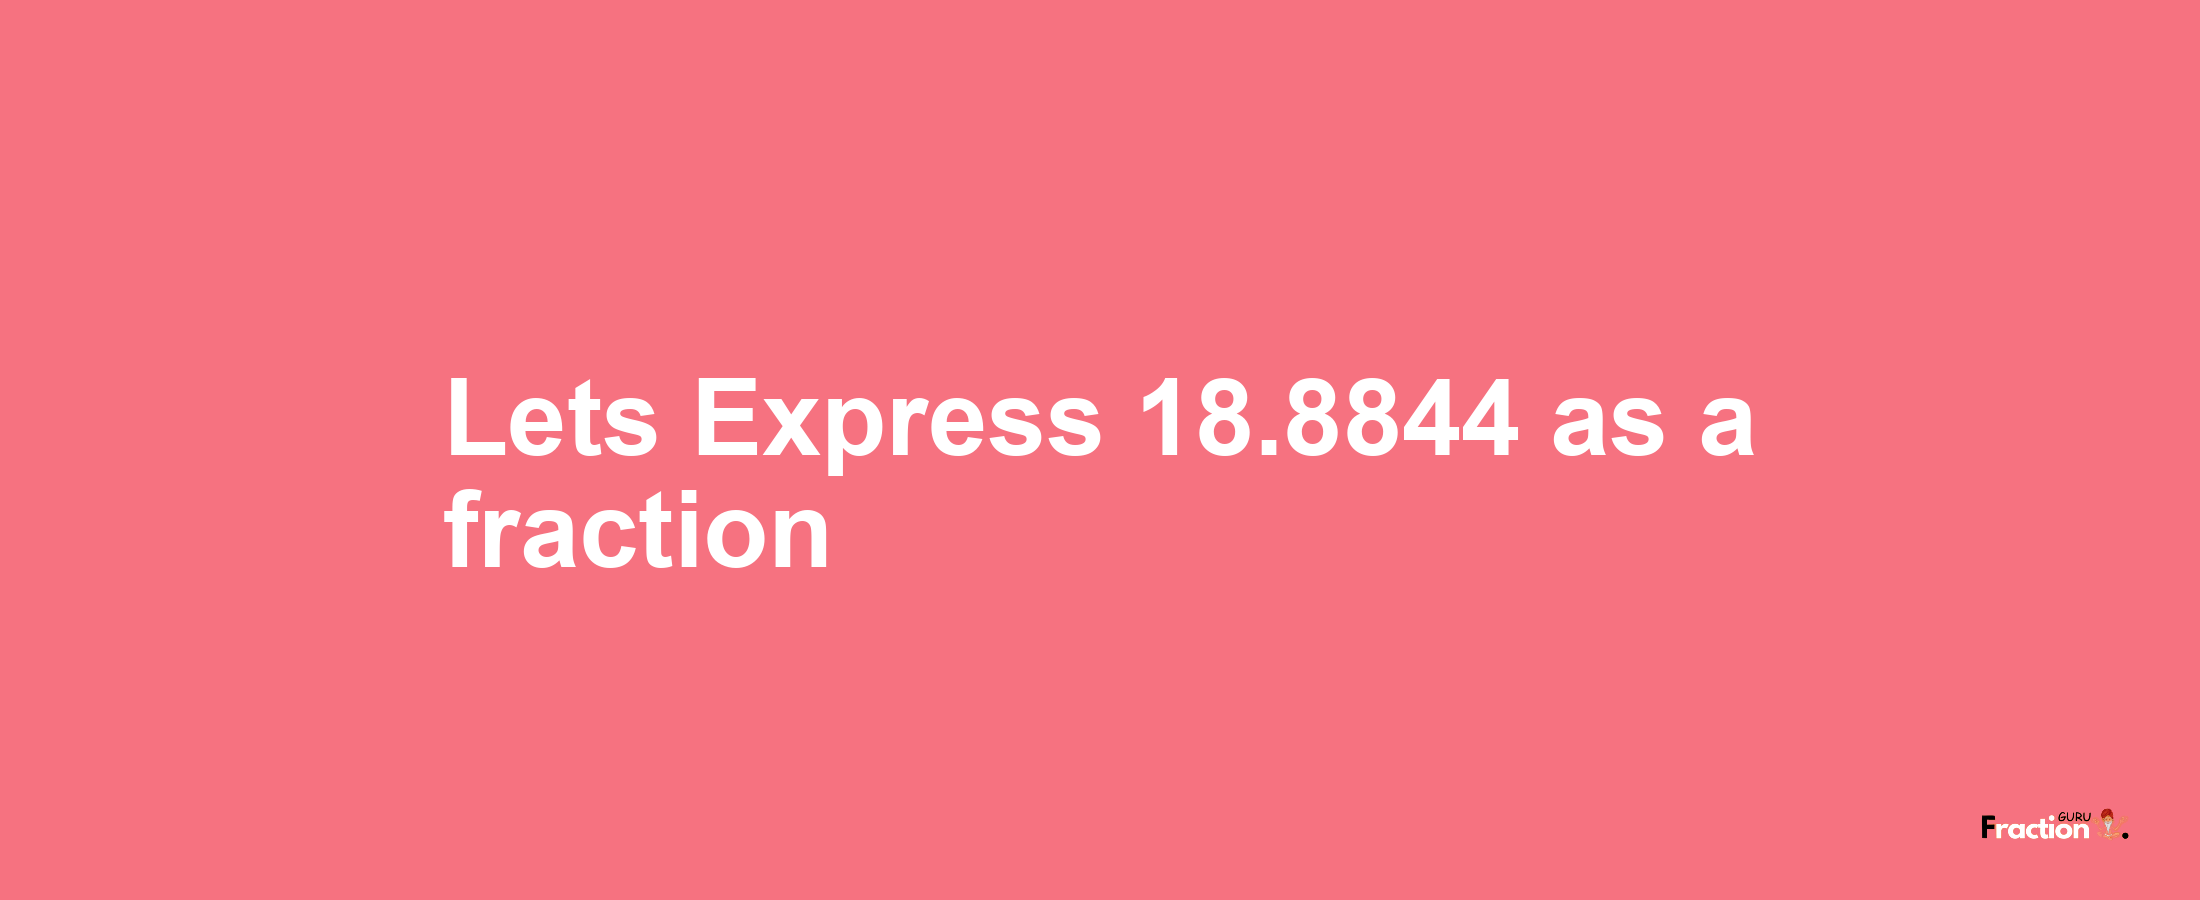 Lets Express 18.8844 as afraction